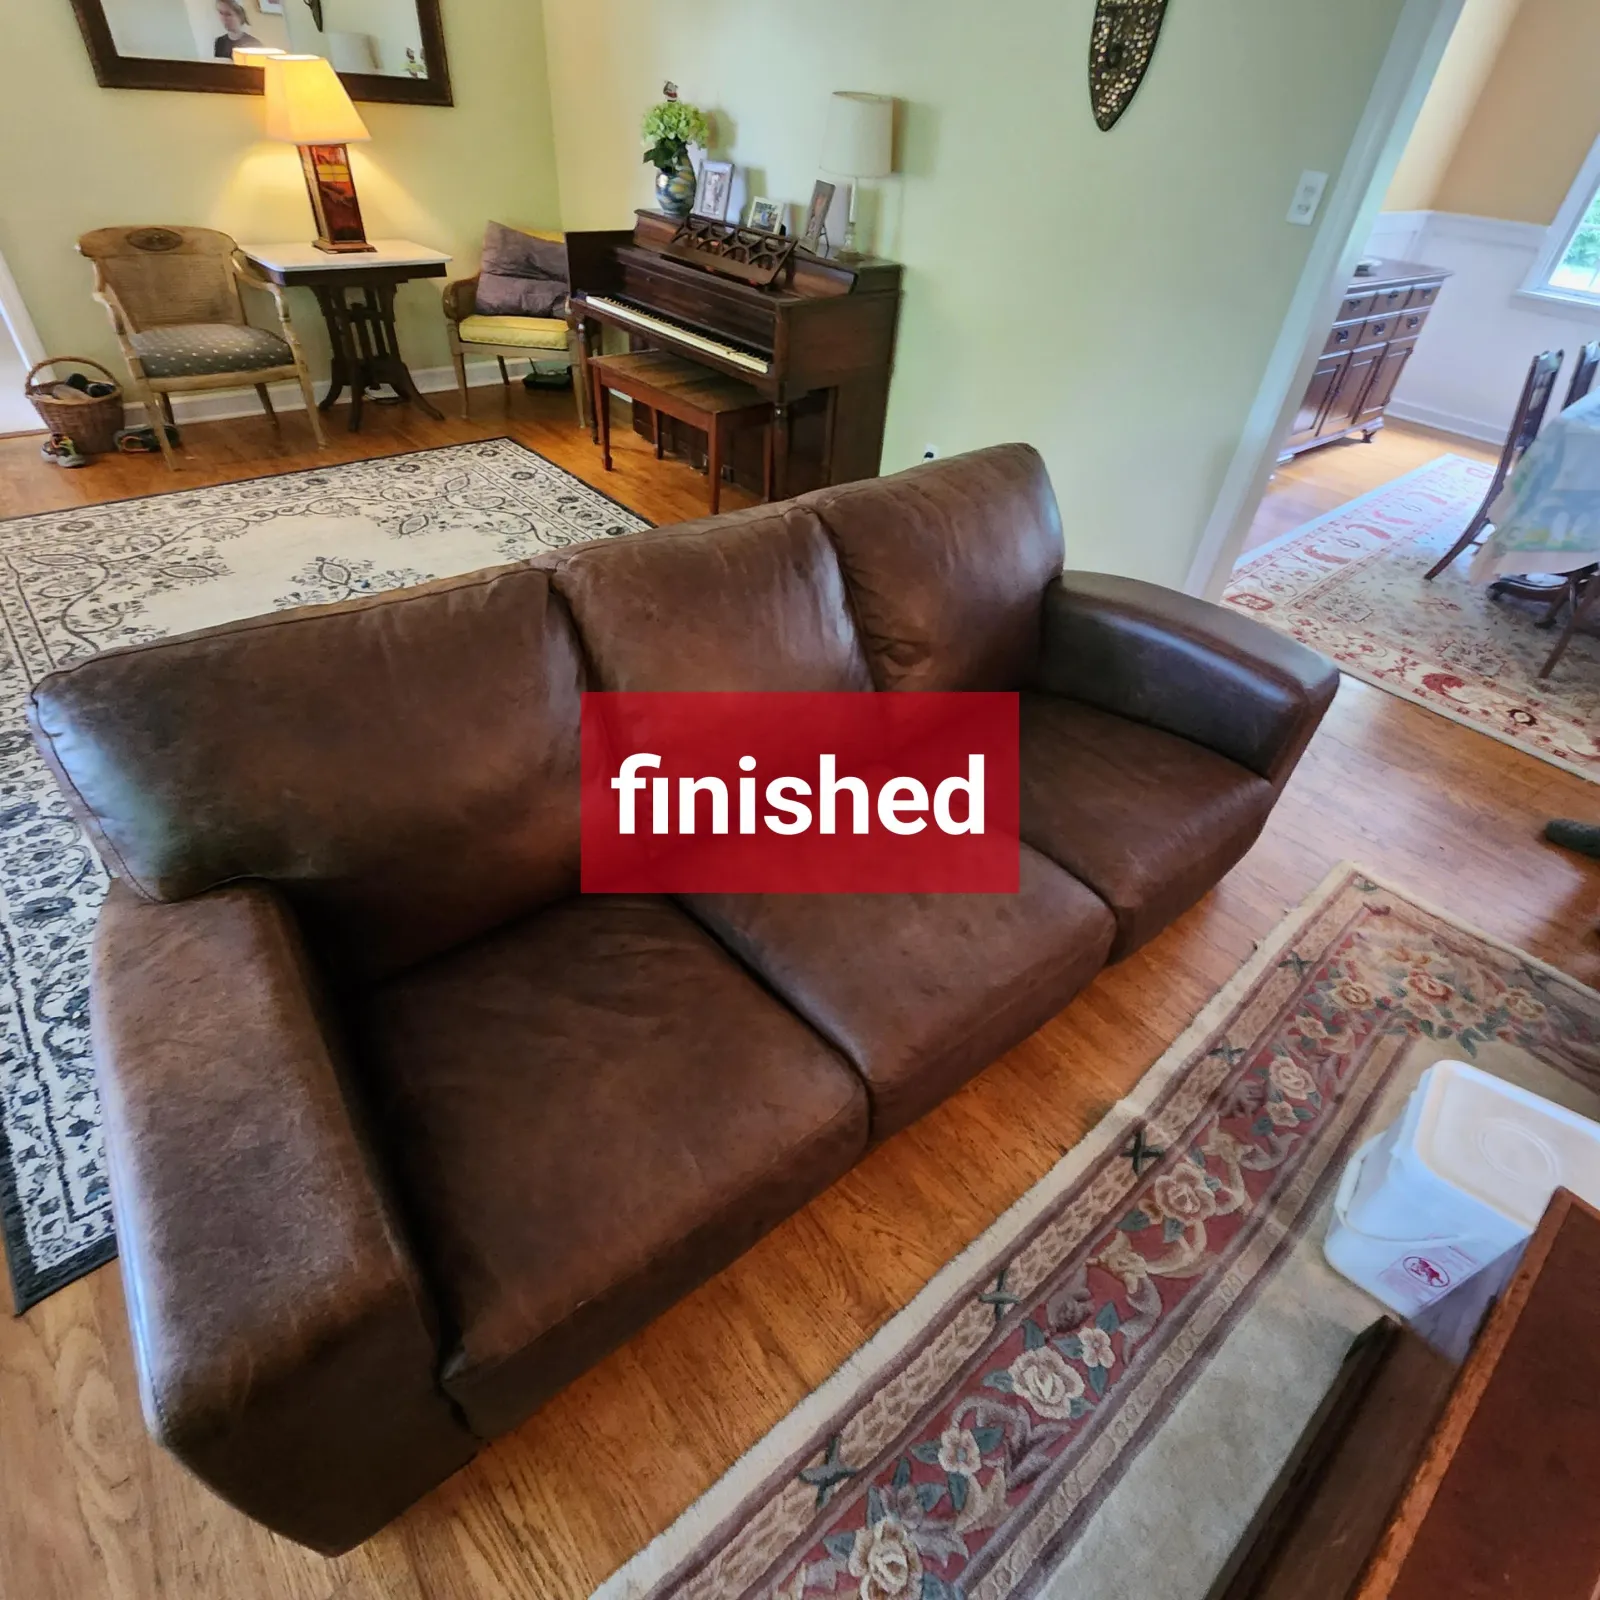 a professionally cleaned leather couch after it was professionally cleaned by Zerorez, in a real customer's home